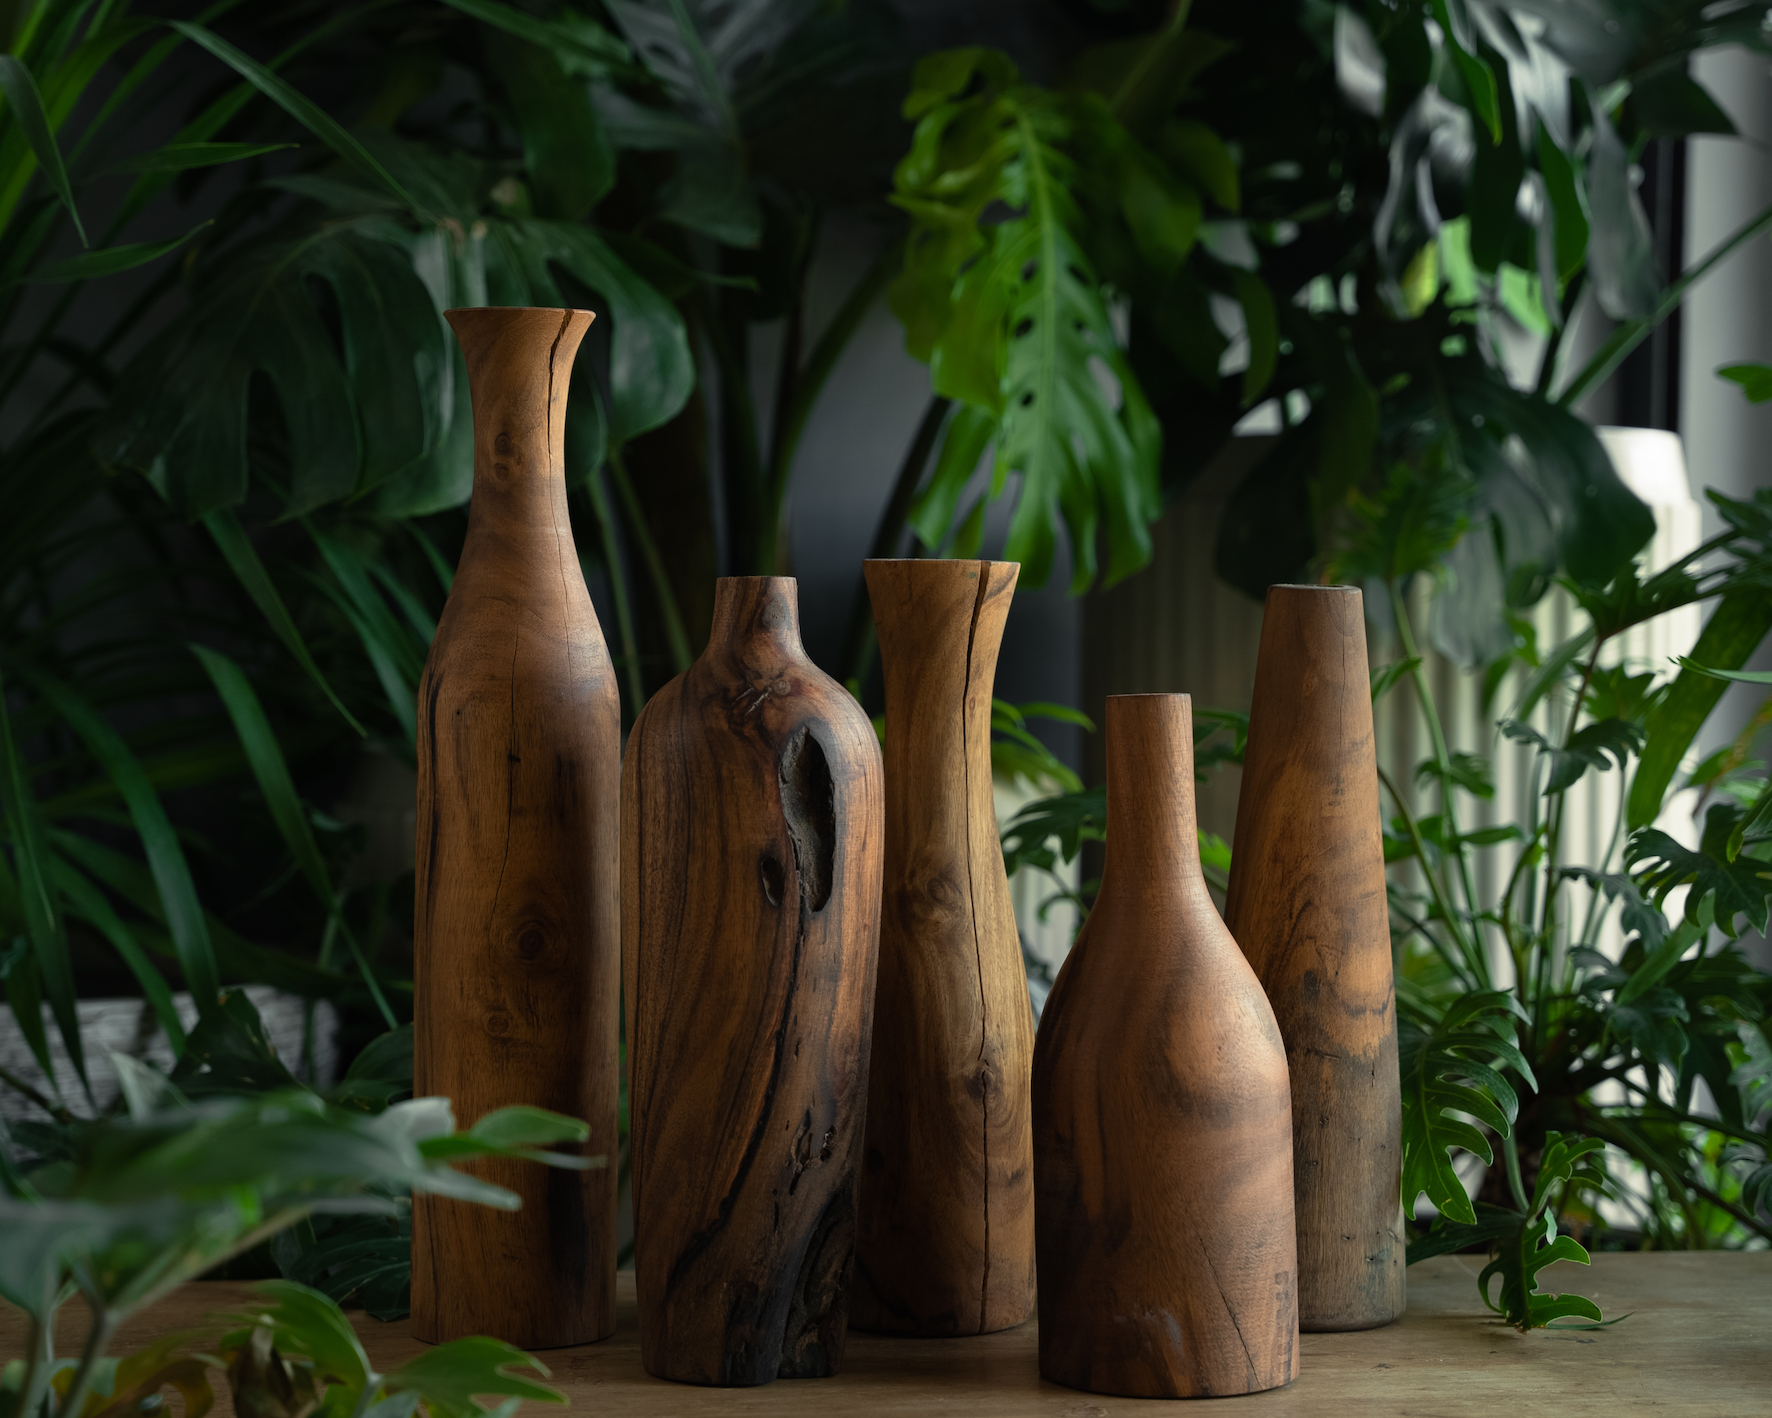 Bangalore based handcrafted planter studio, Palasa launches their Wooden Planters ‘The KAI Collective’ this summer